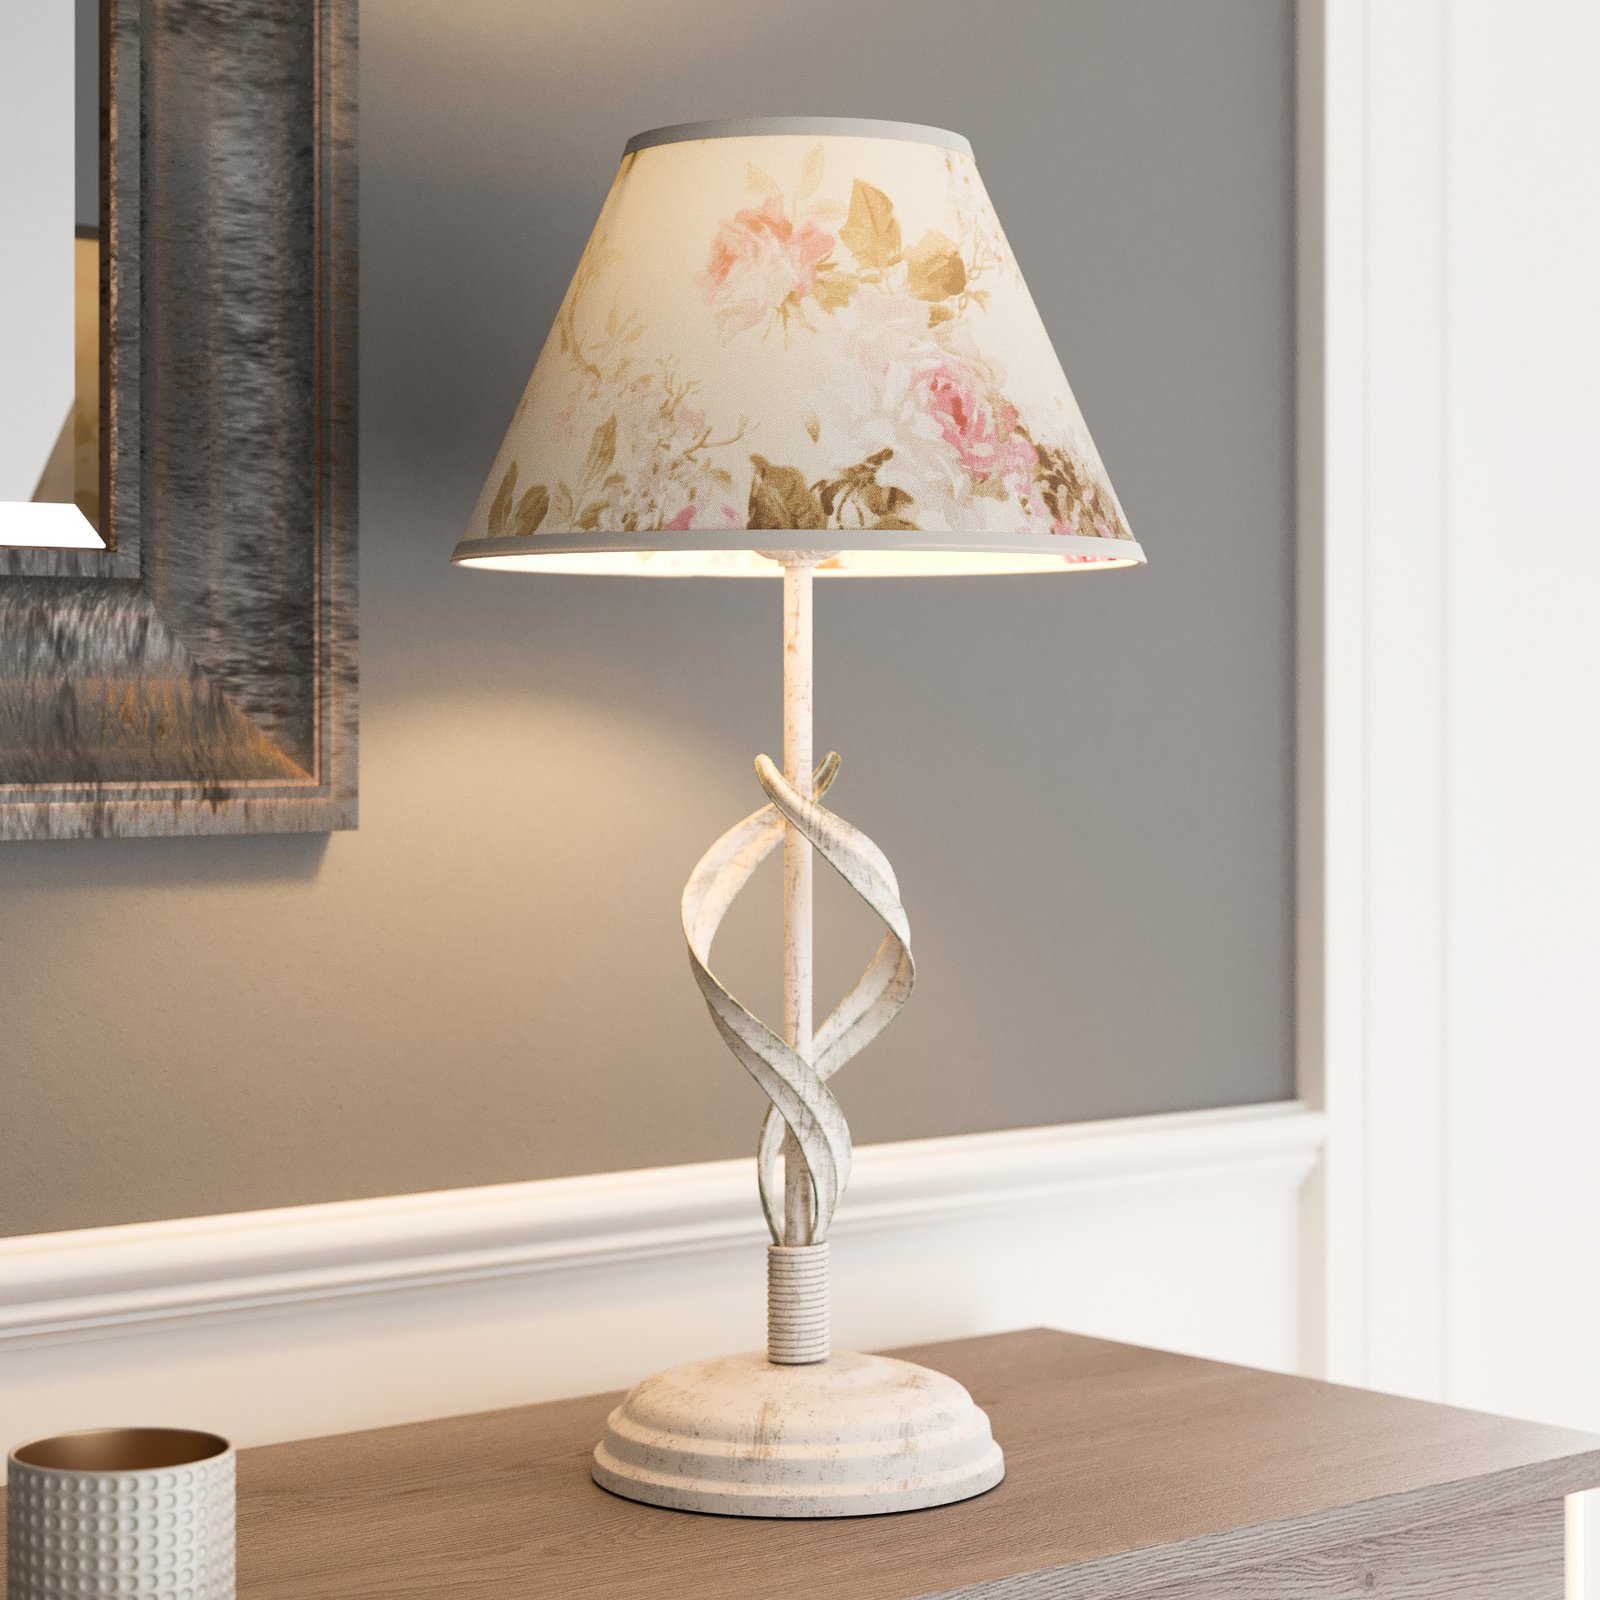 Sara table lamp with a floral lampshade